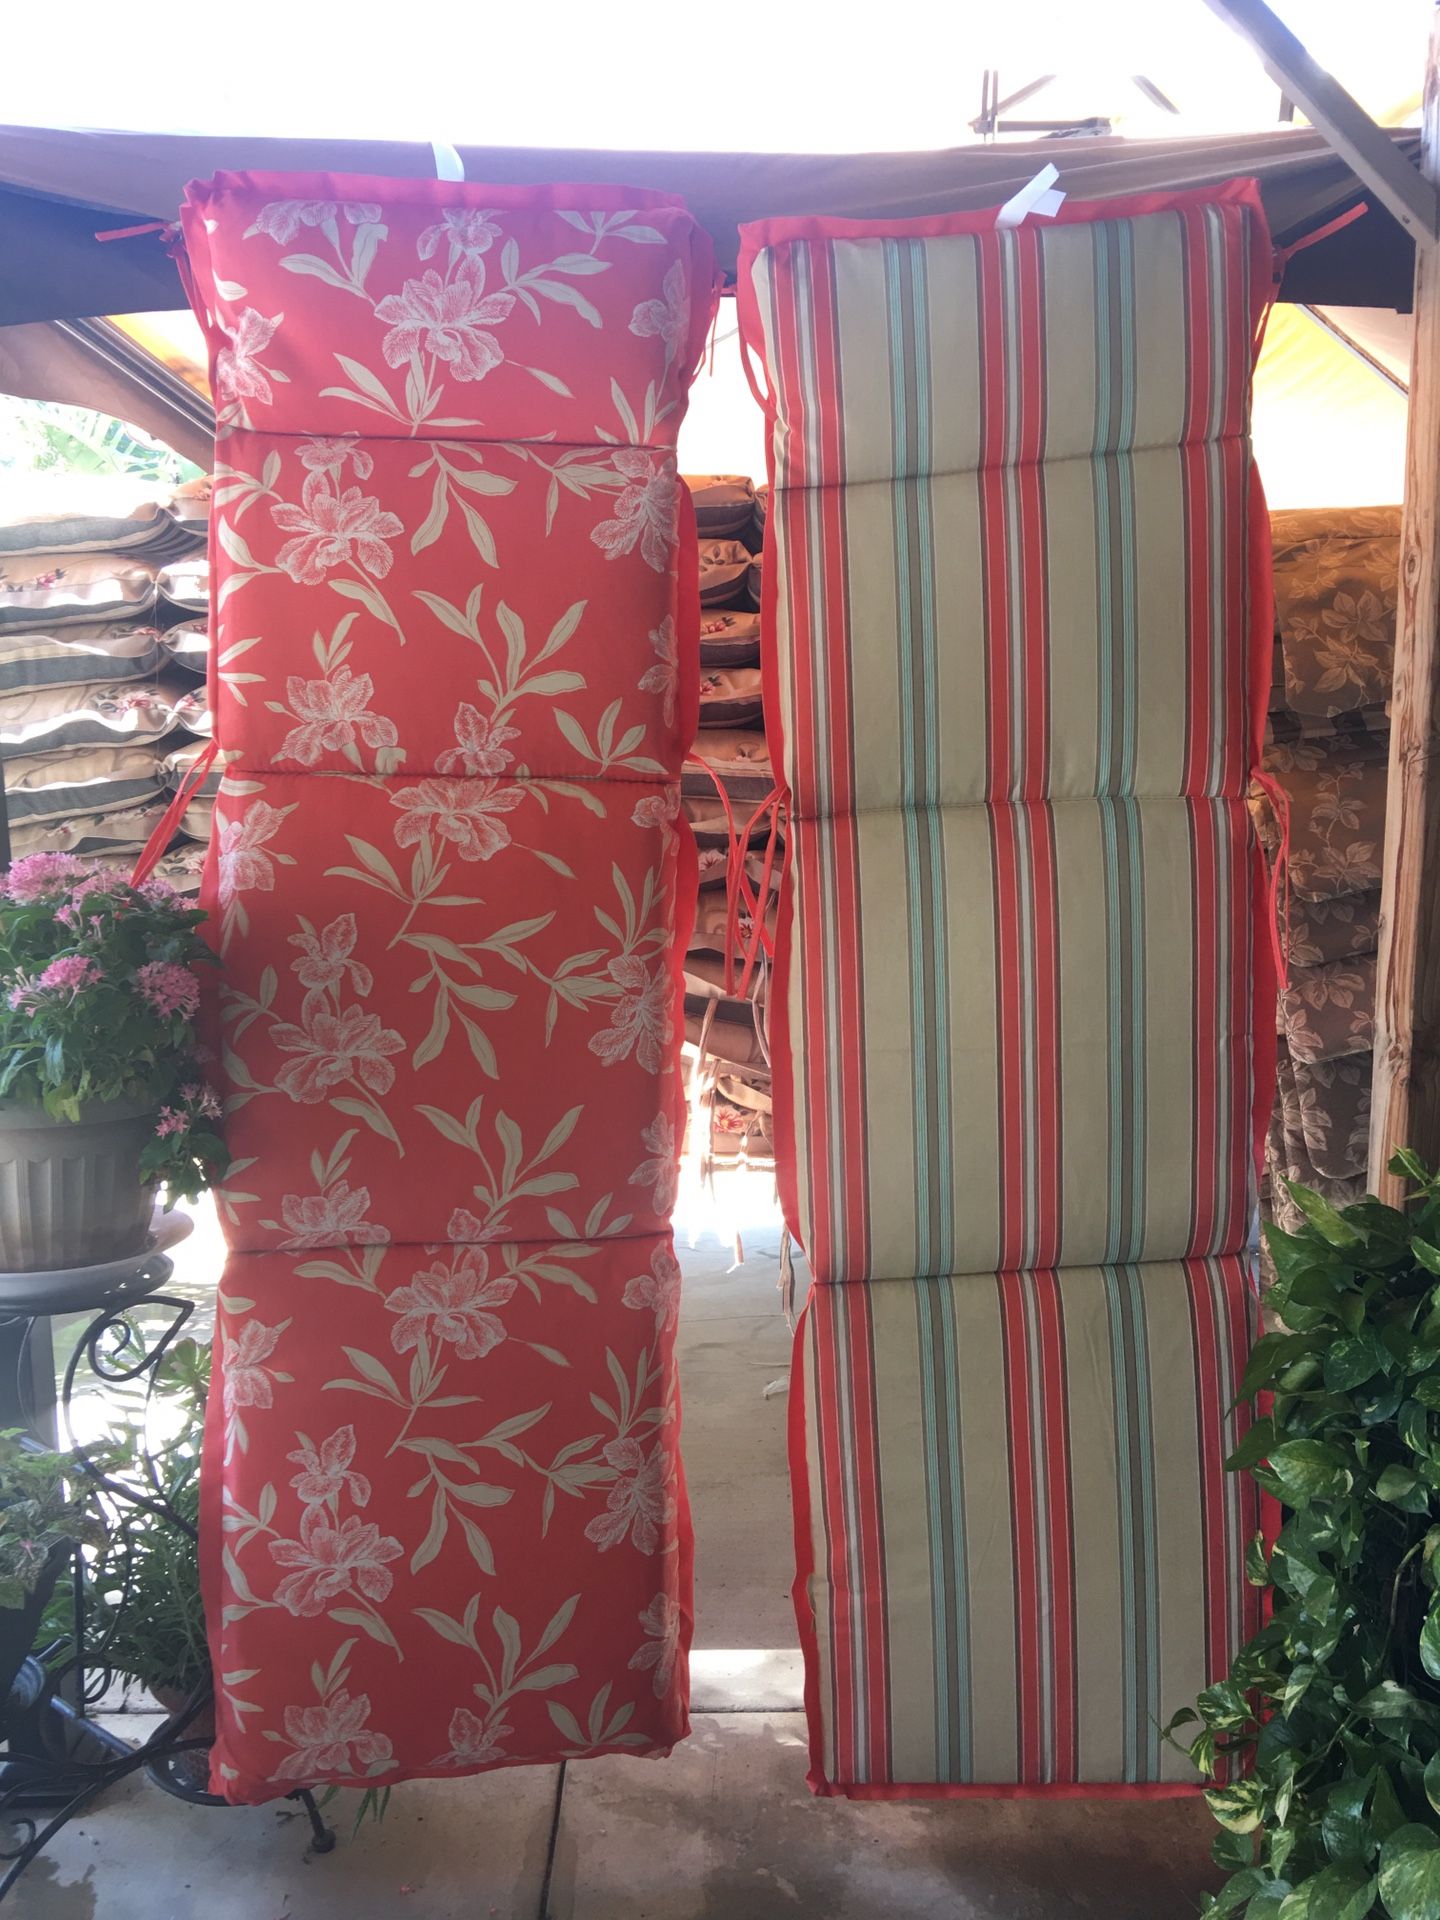 CHAISE LOUNGE CUSHIONS | Water Proof for outdoor patio chair furniture | $30 each | Price is FIRM | Salmon Stripe